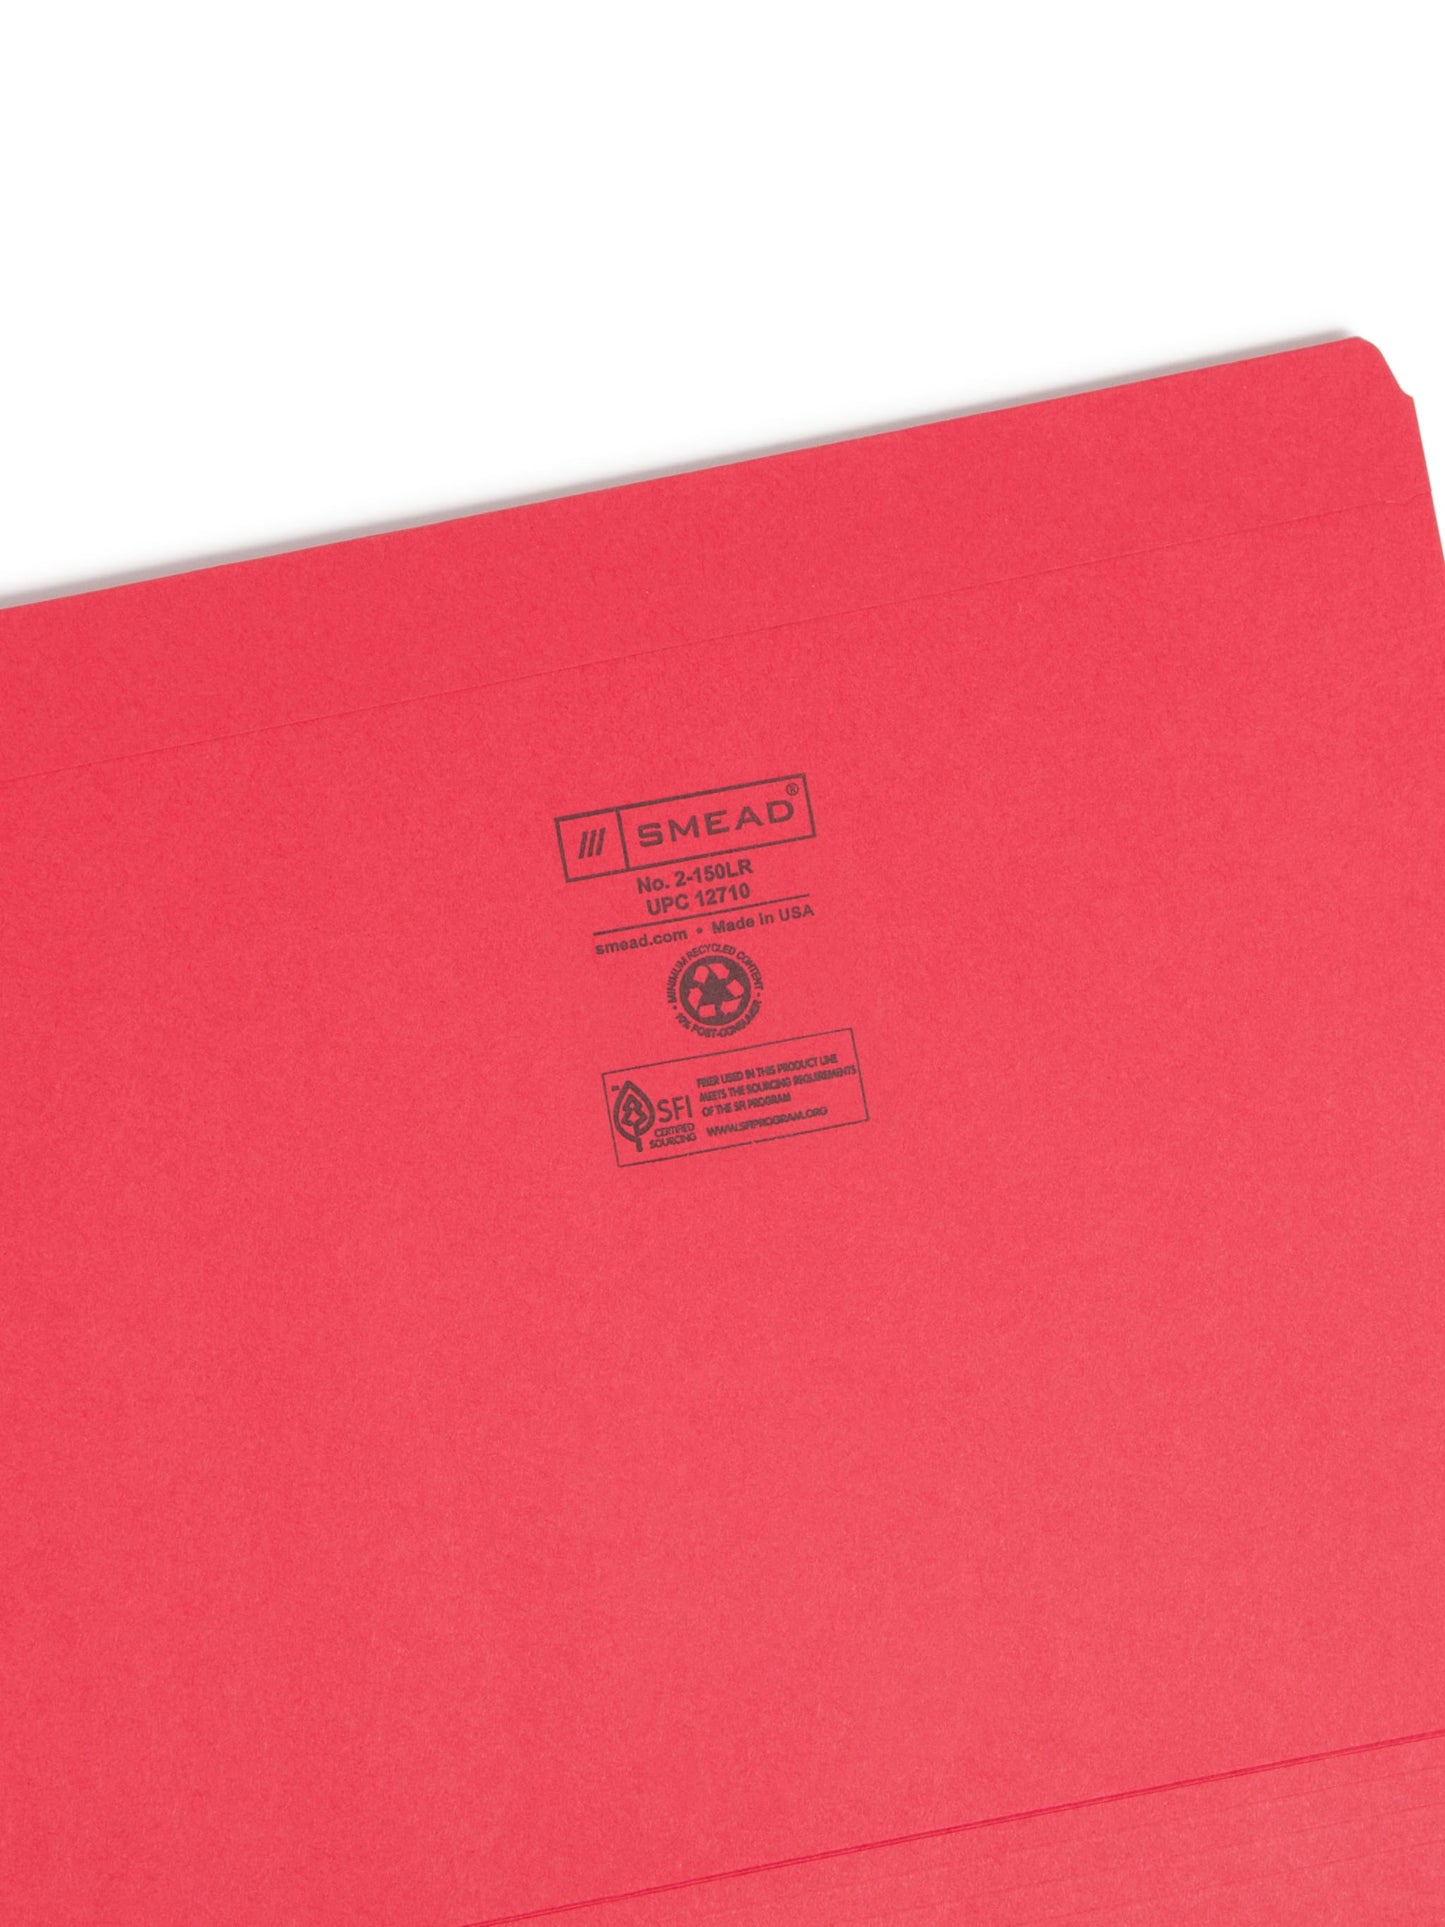 Reinforced Tab File Folders, Straight-Cut Tab, Red Color, Letter Size, Set of 100, 086486127103